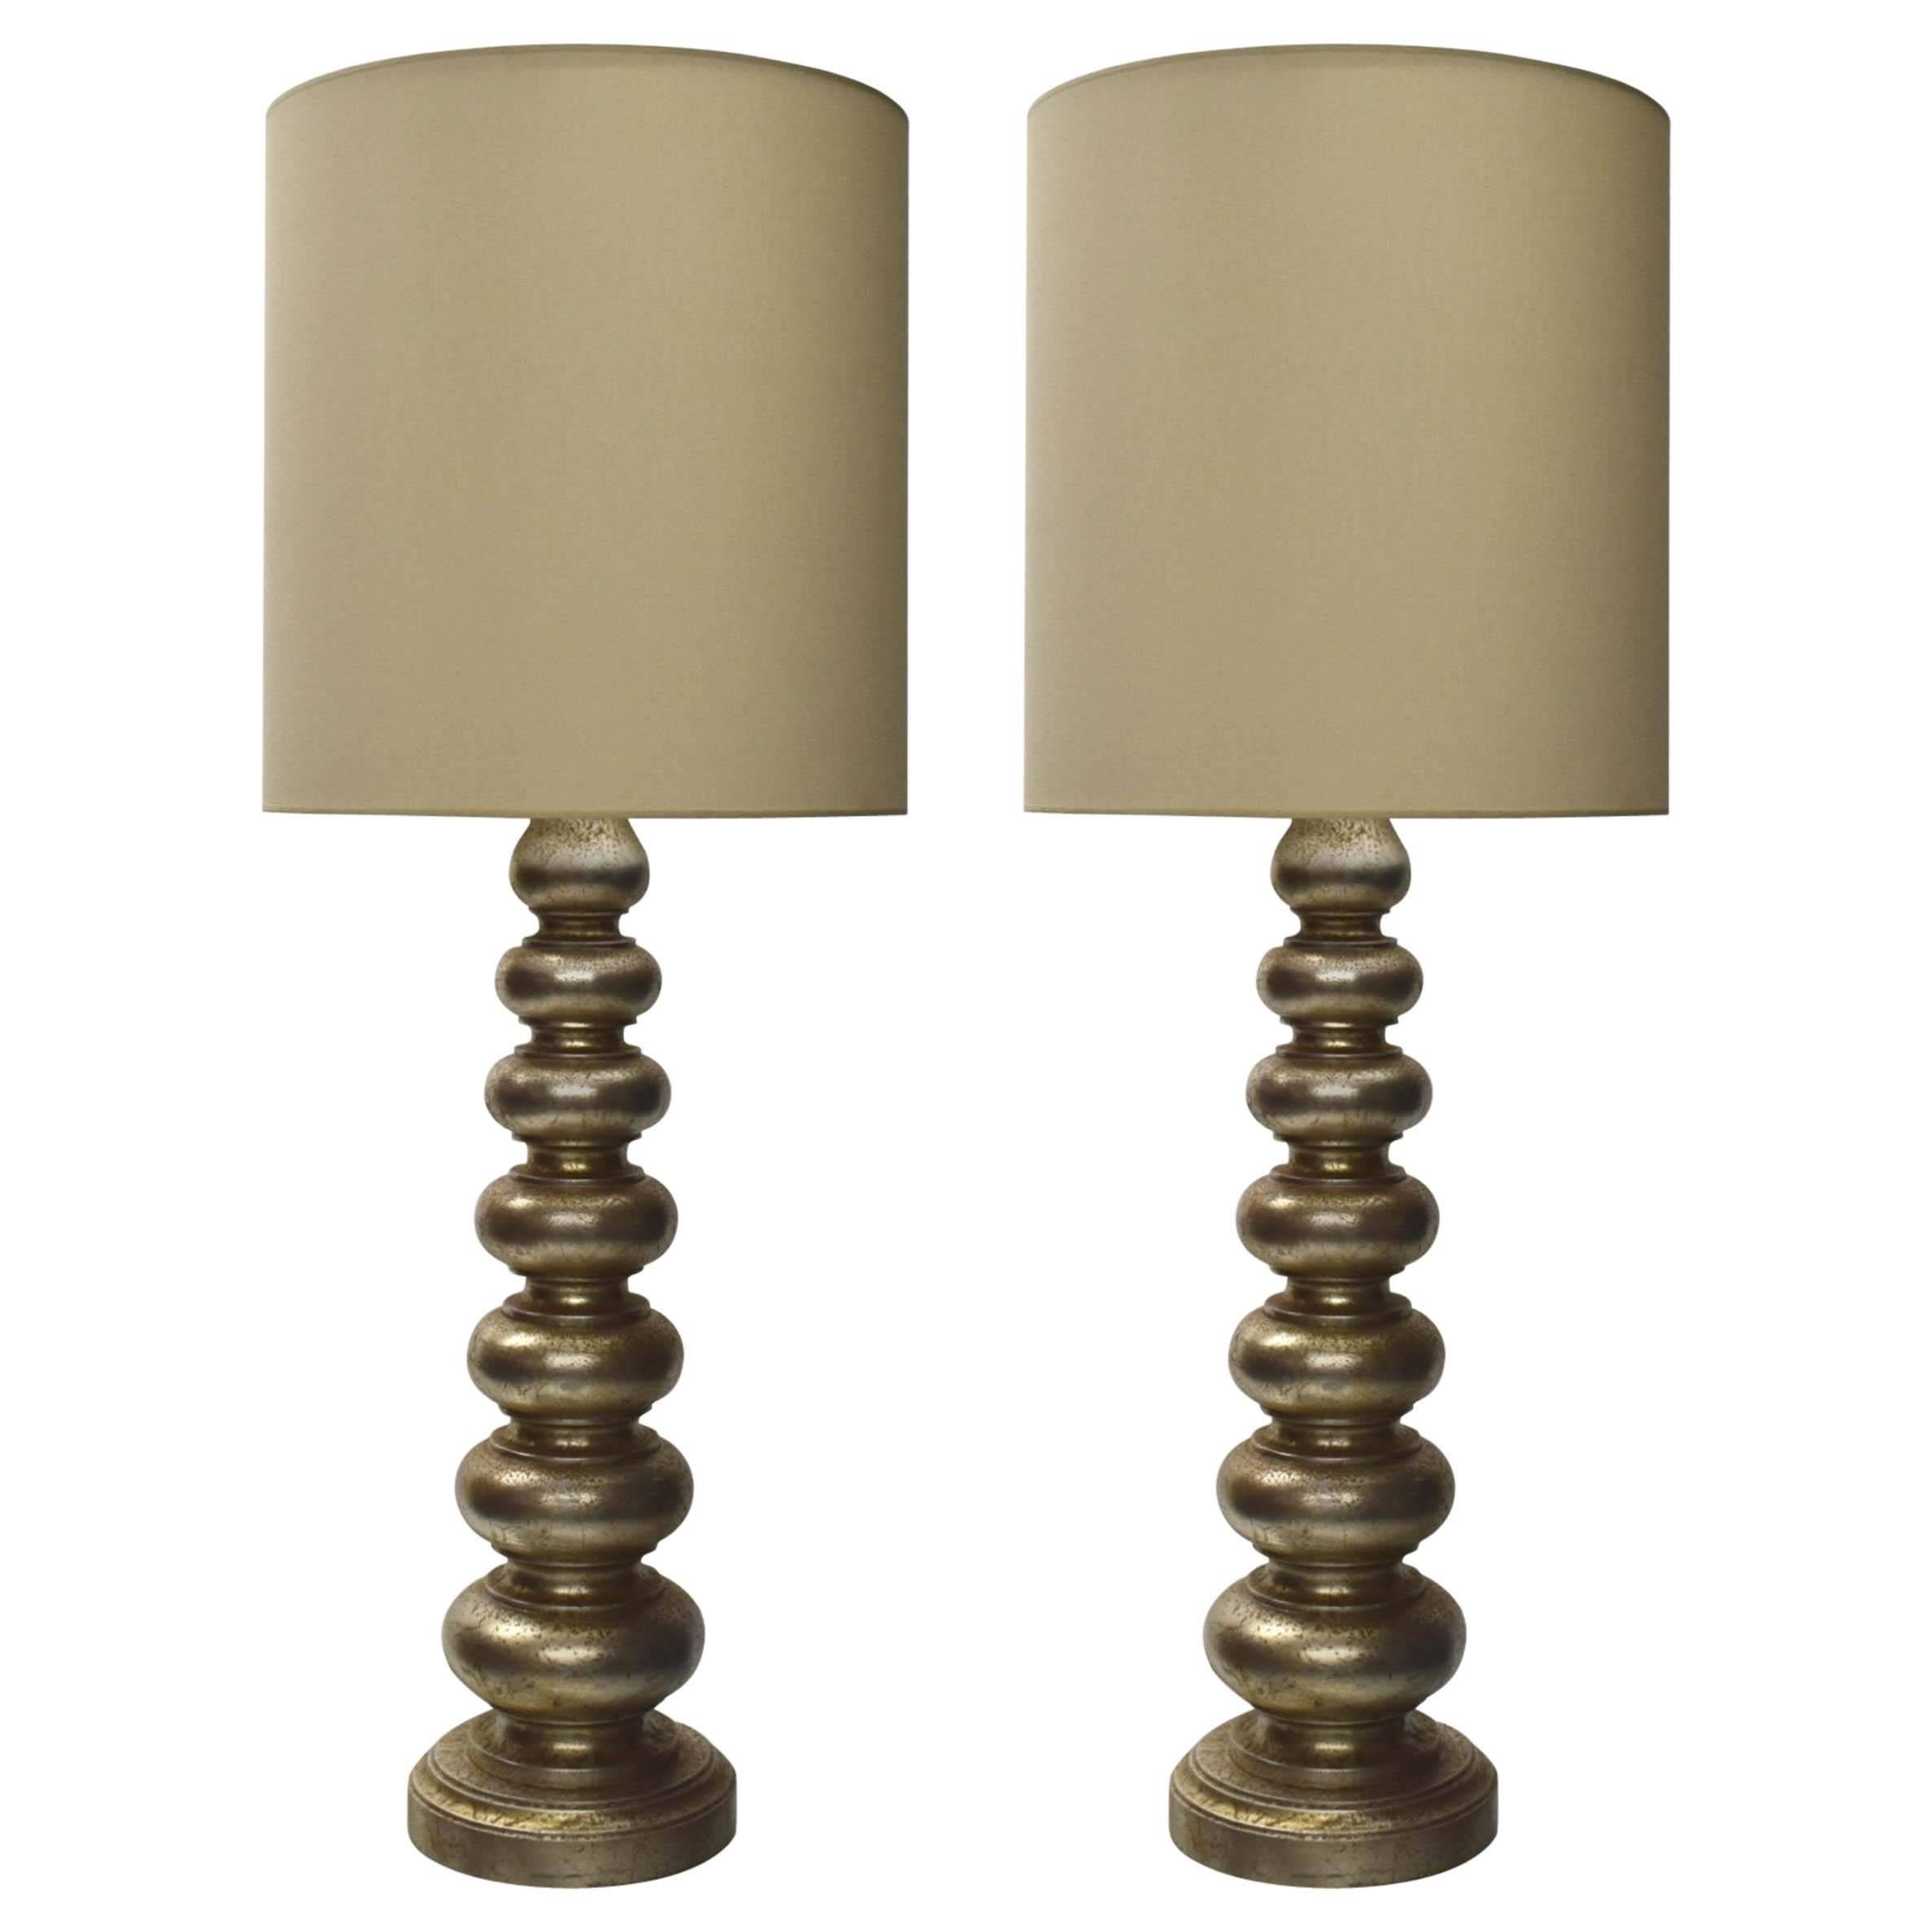 Tall Pair of Table Lamps in Original Silver Leaf, USA Circa 1940 